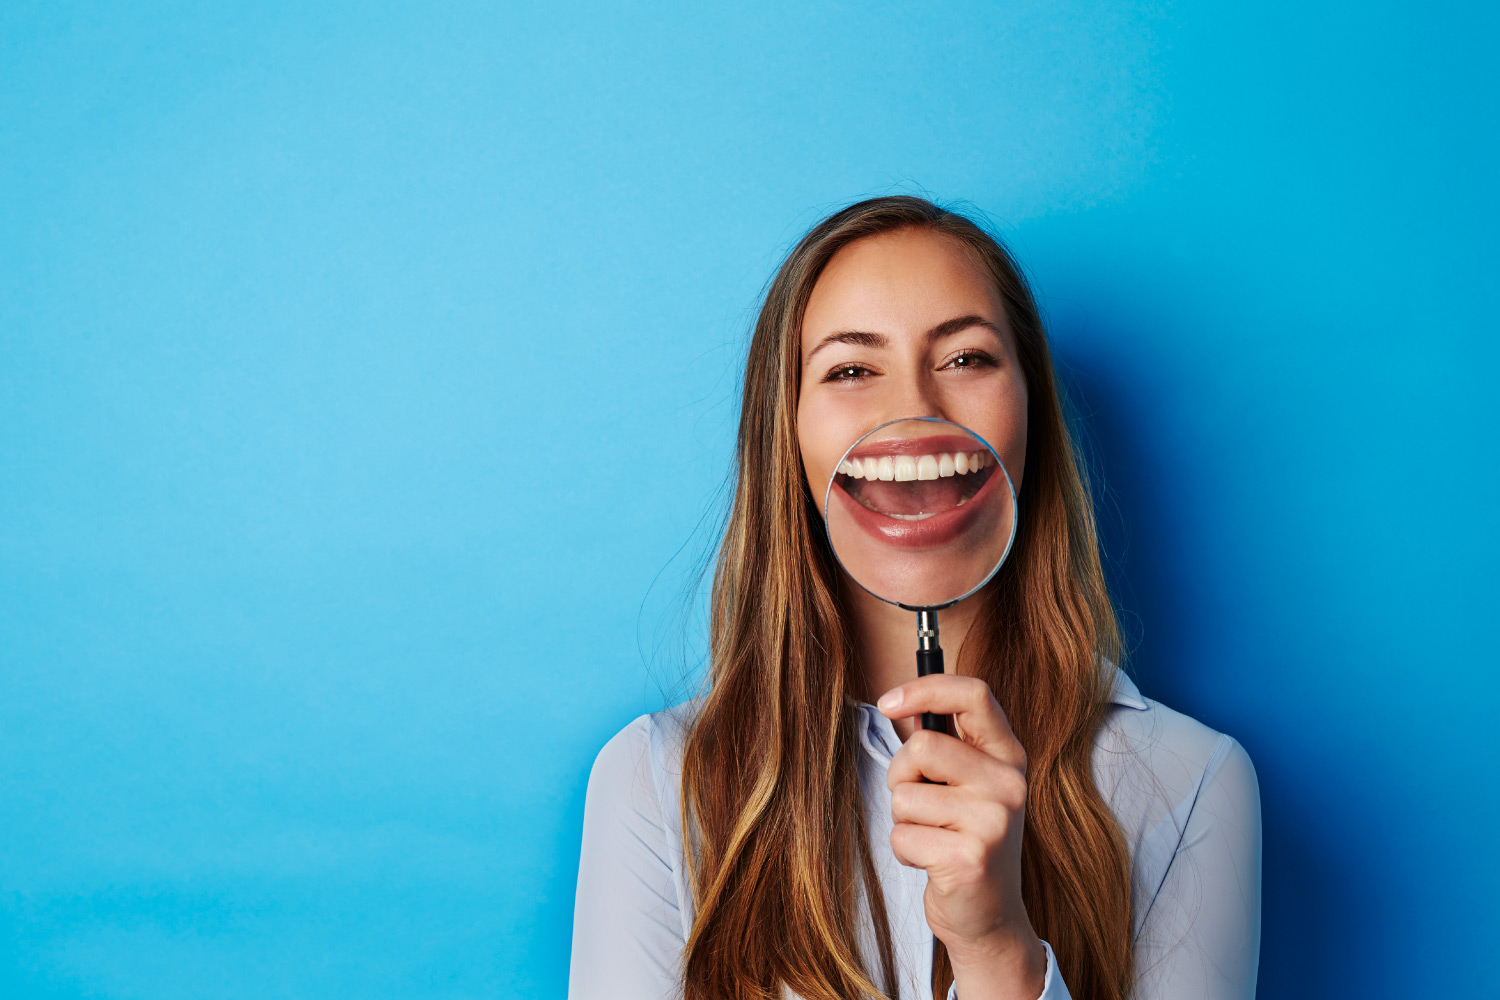 A brunette woman smiles as she holds a magnifying glass to her mouth against a blue wall